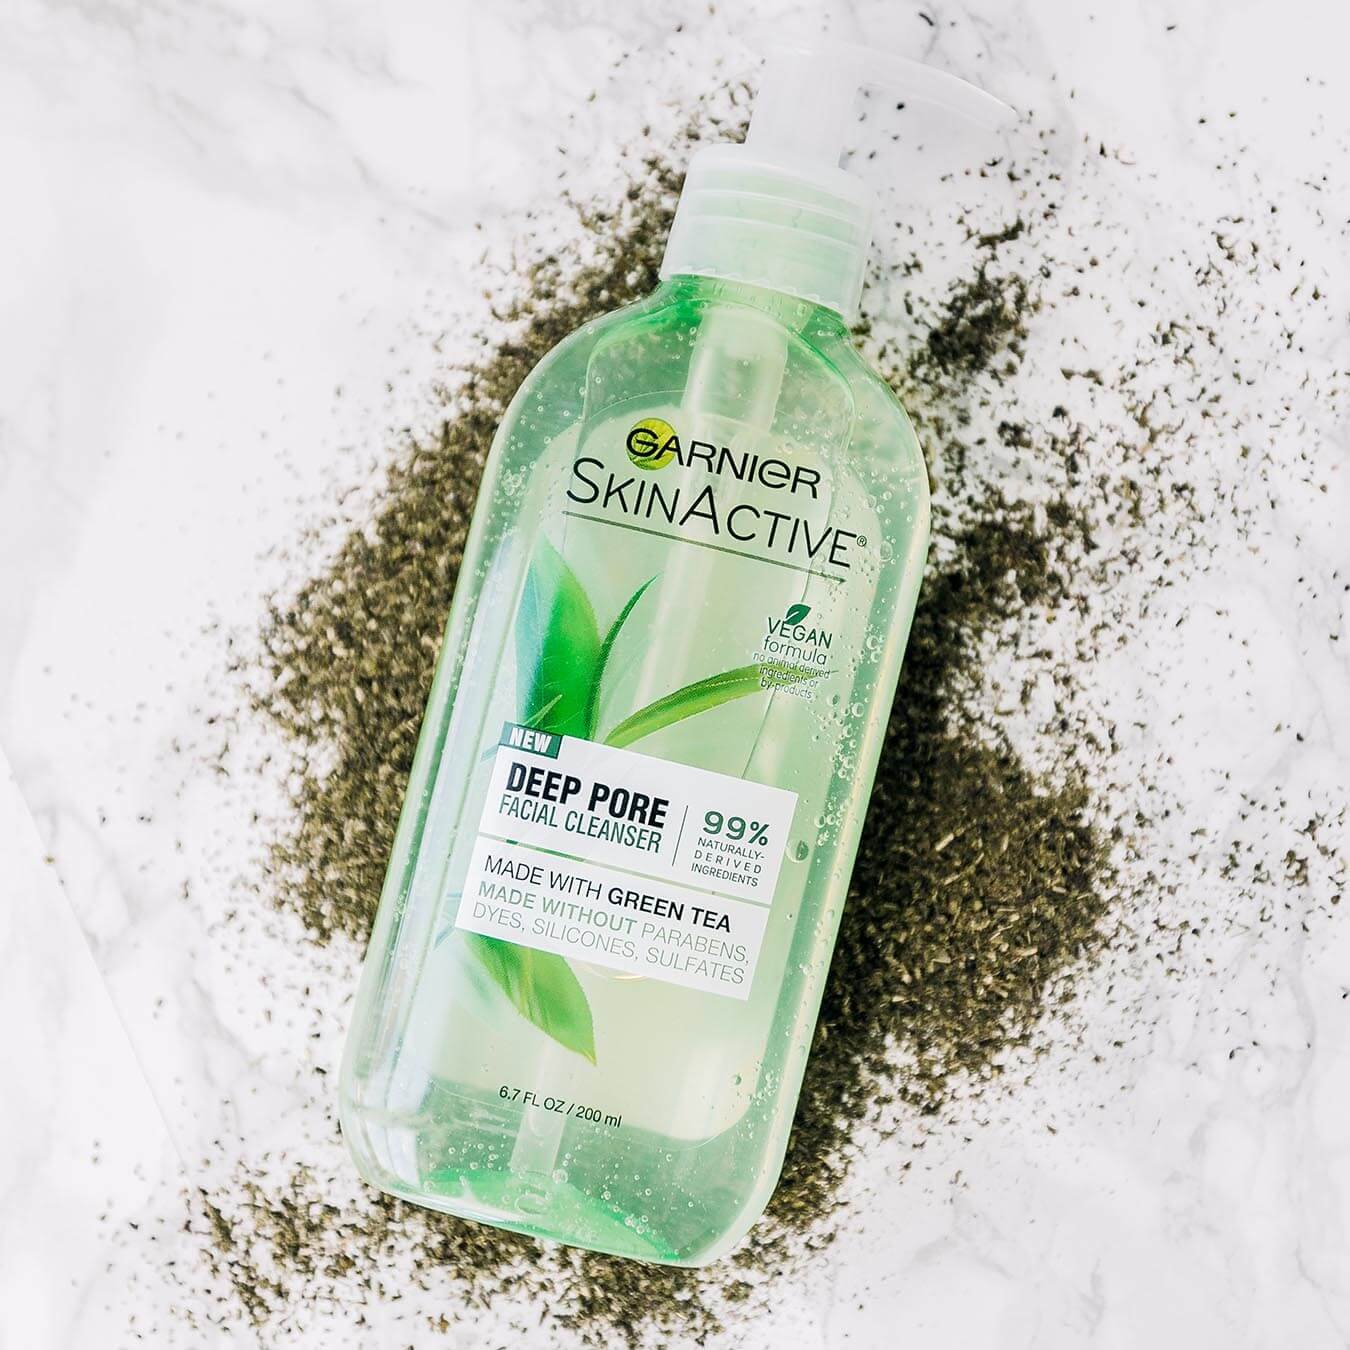 Garnier SkinActive Deep Pore Facial Cleanser with Green Tea on a pile of powdered green tea on white marble.